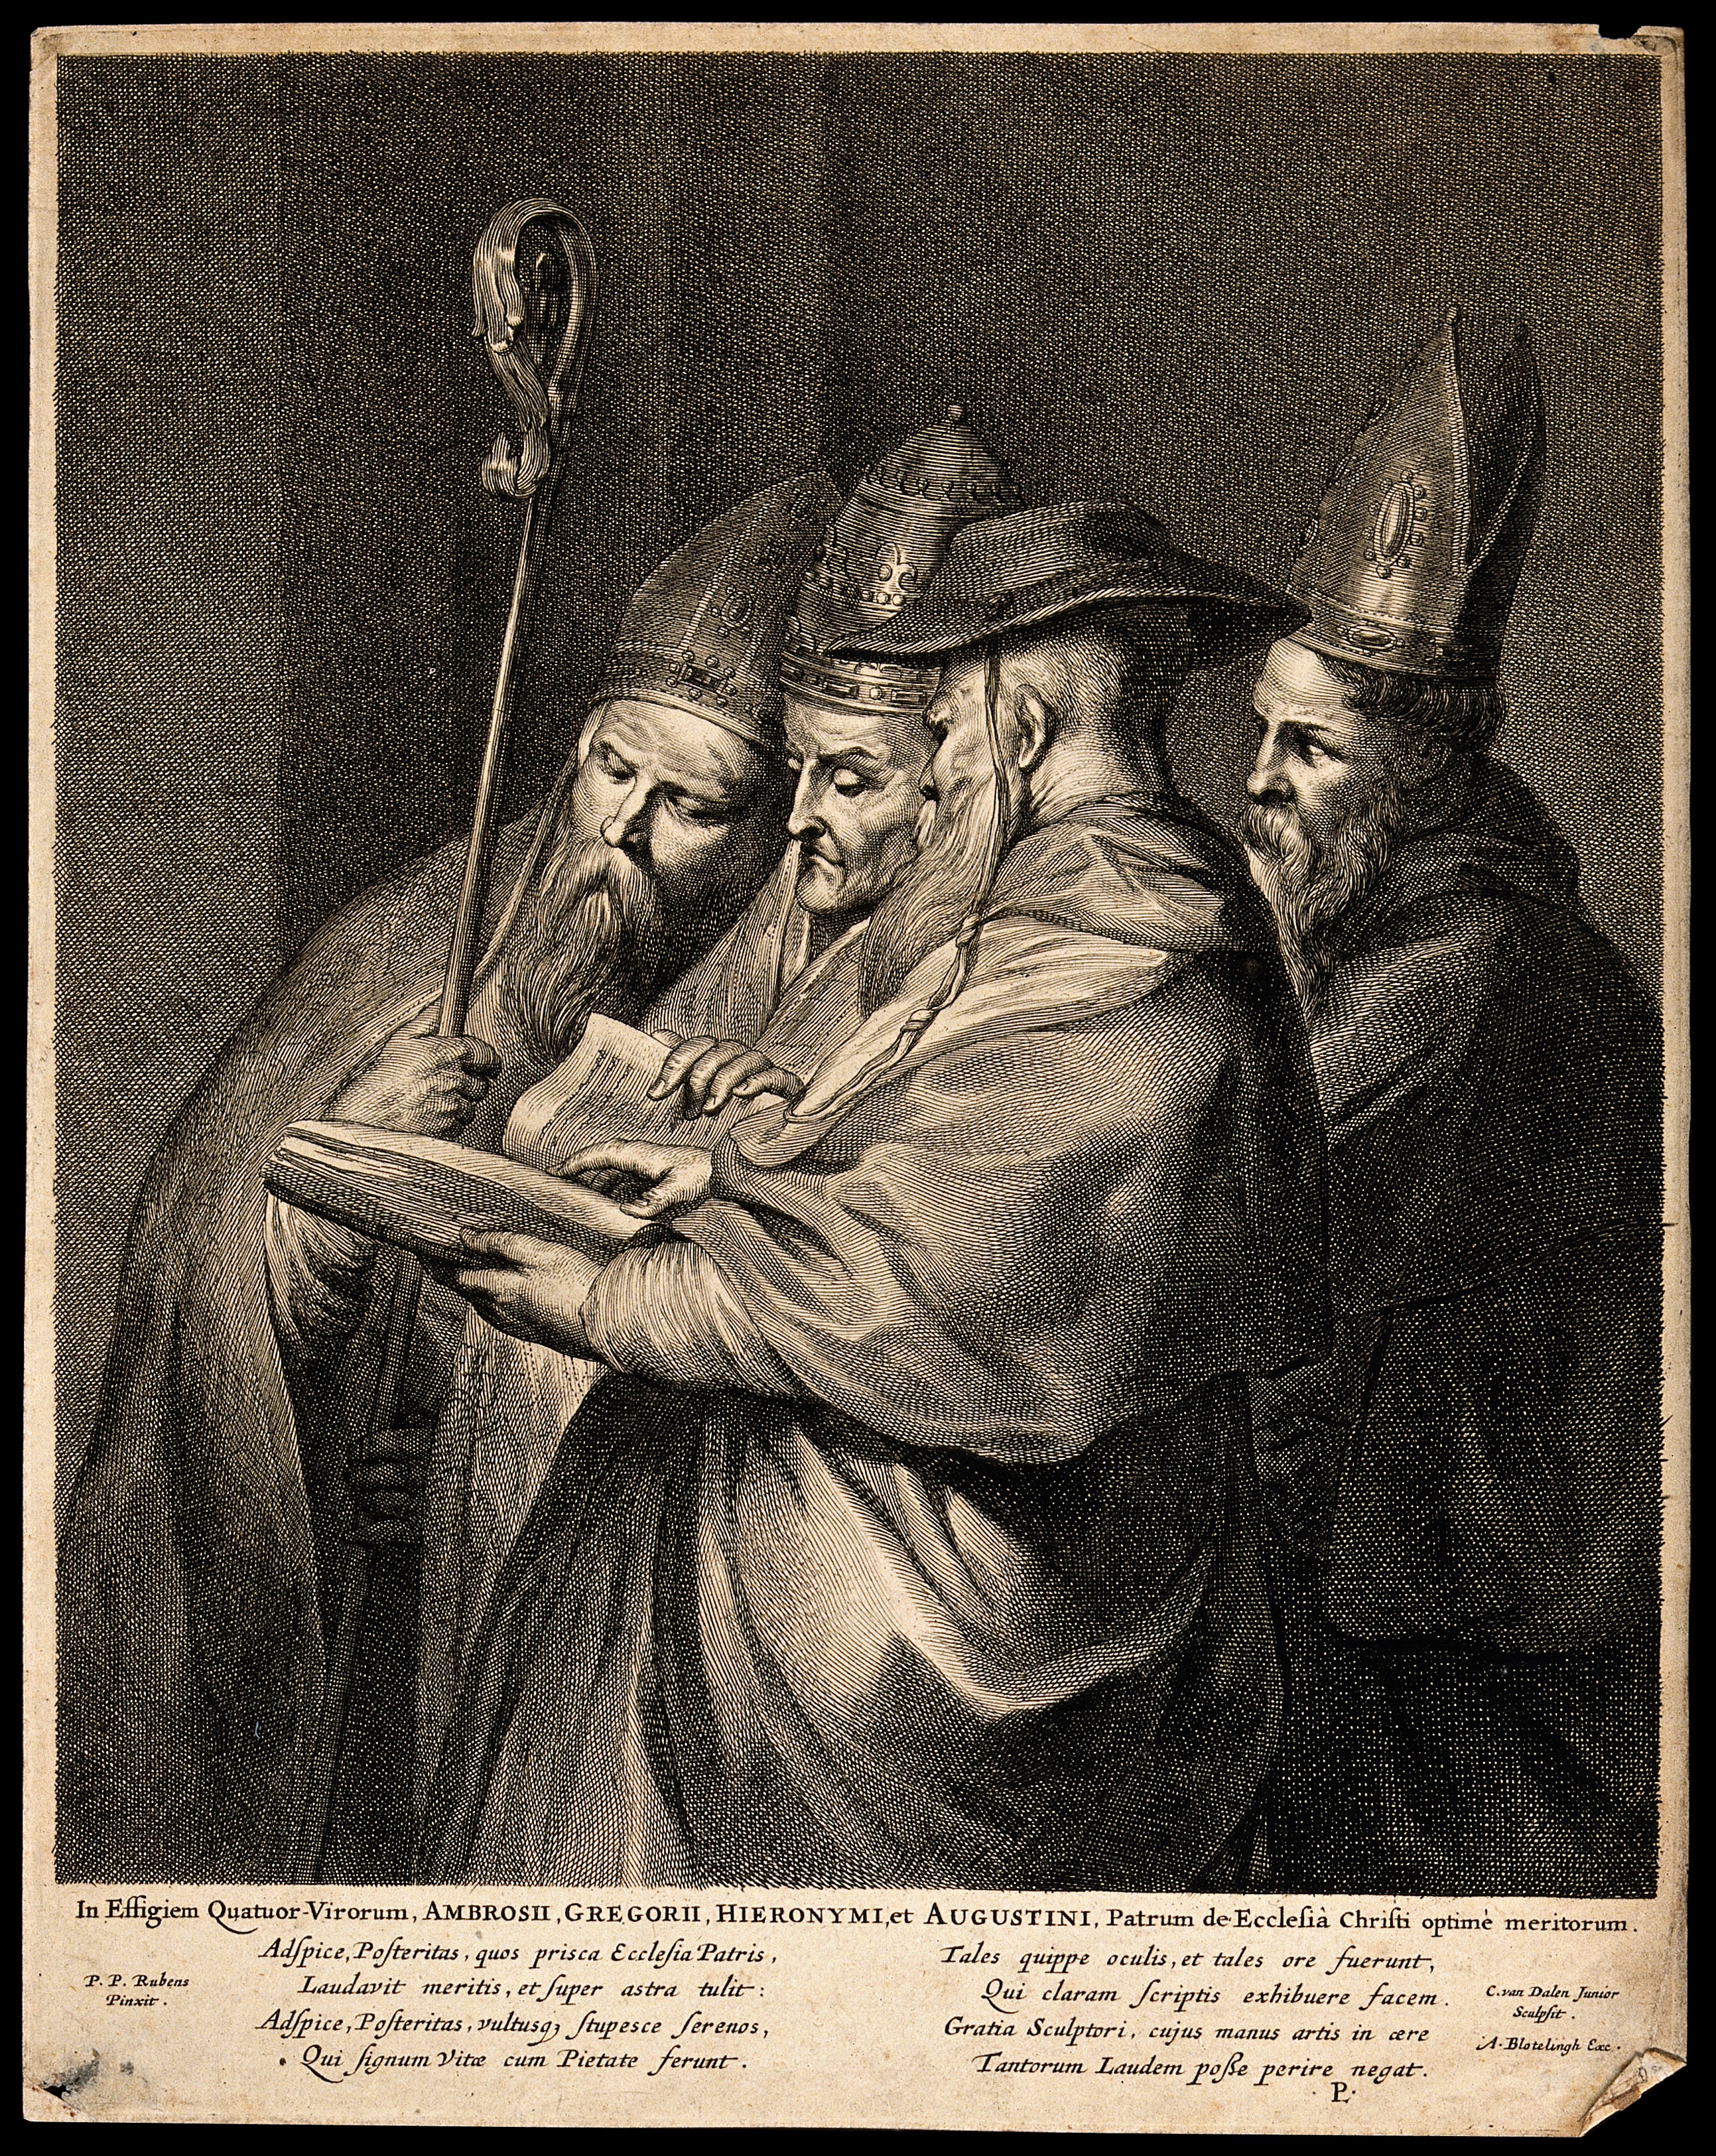 Church Fathers - Ambrose, Gregory, Jerome and Augustine